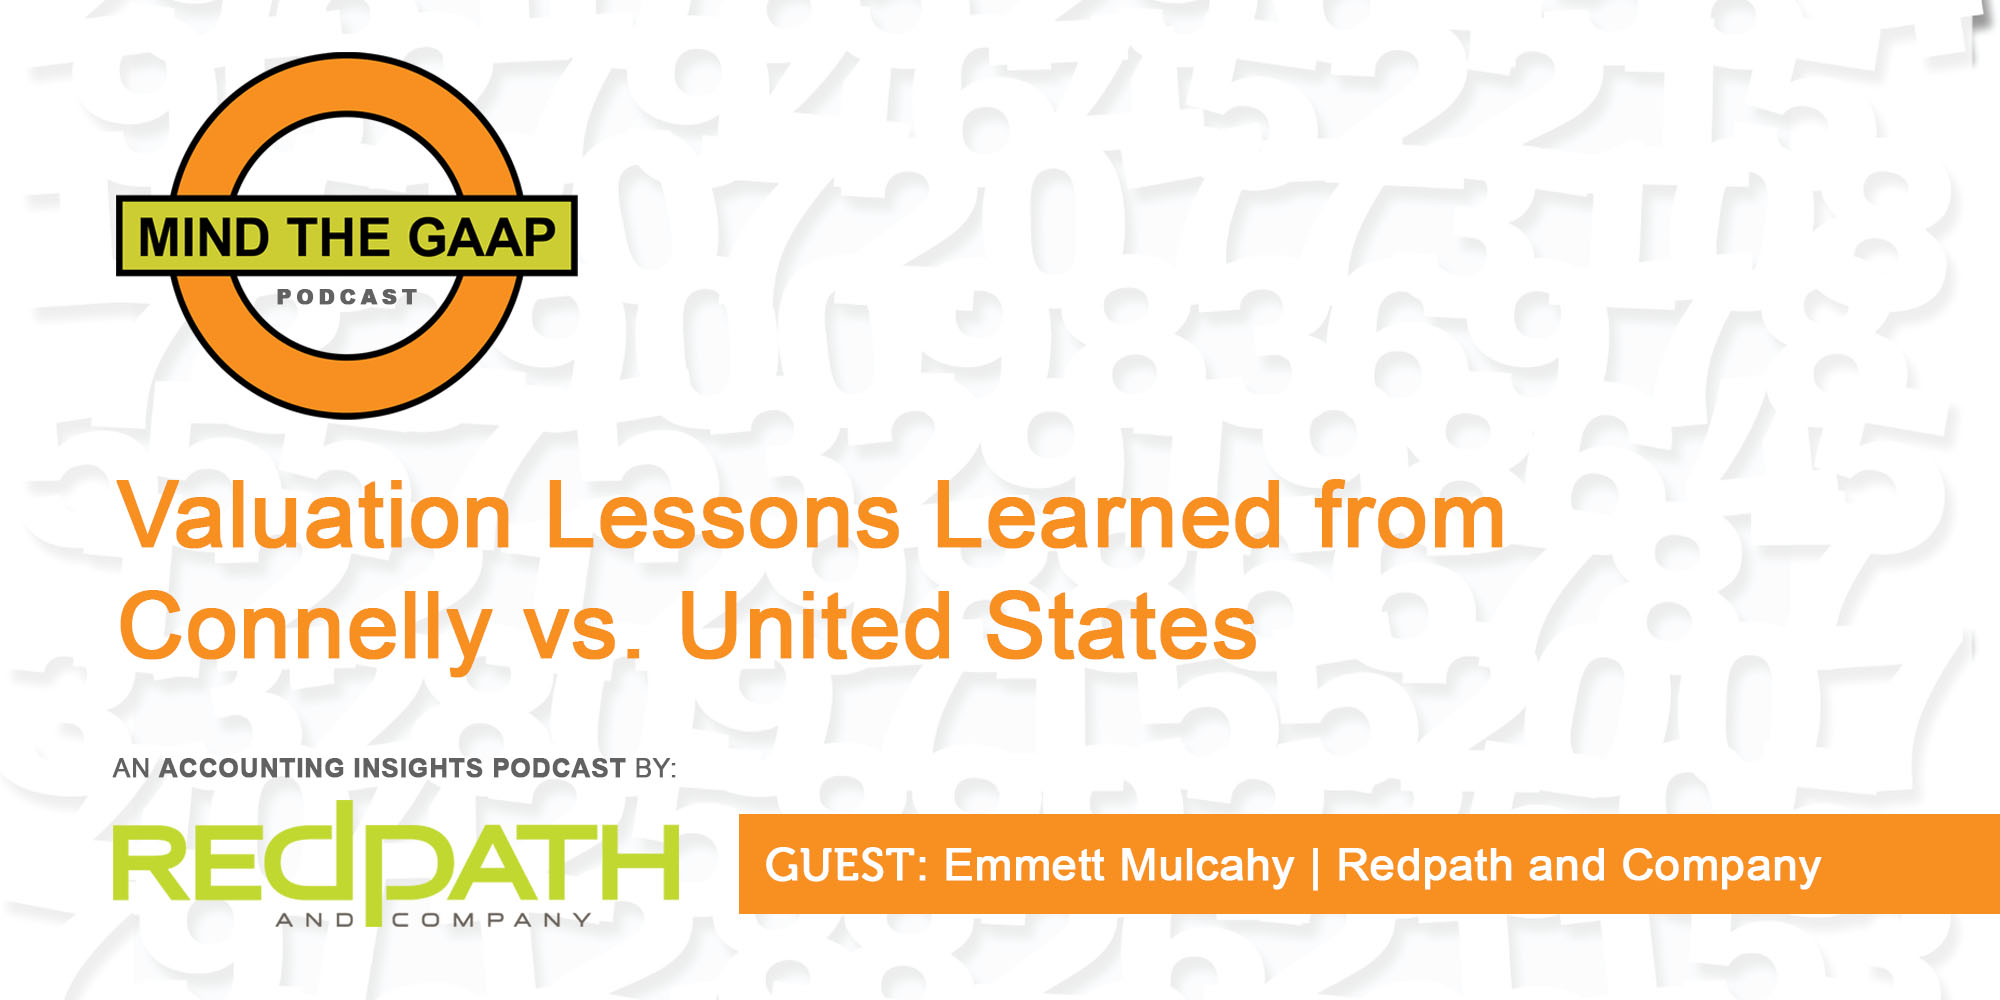 Mind the GAAP Podcast: Valuation Lessons Learned from Connelly vs. United States